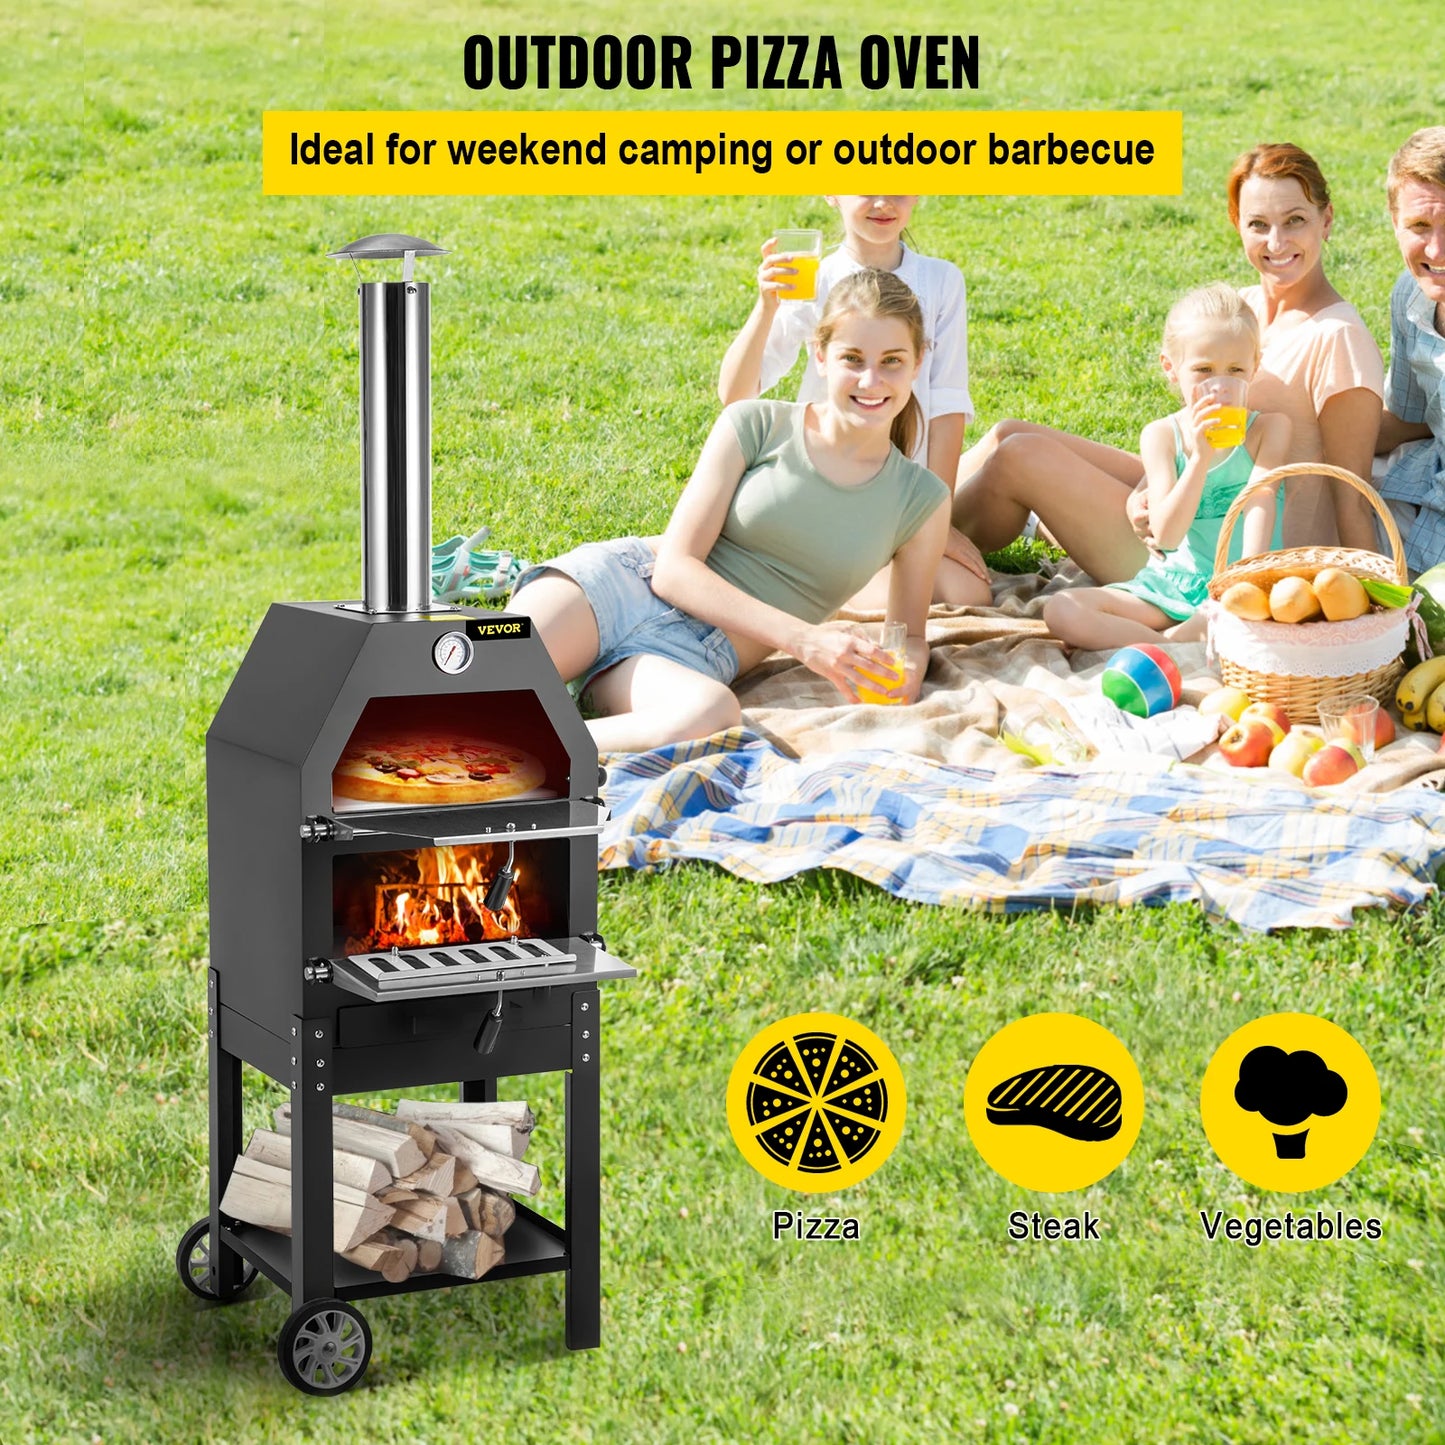 VEVOR 12" Wood Fried Pizza Oven with Wheels & Handle 2-Layer Portable Baking